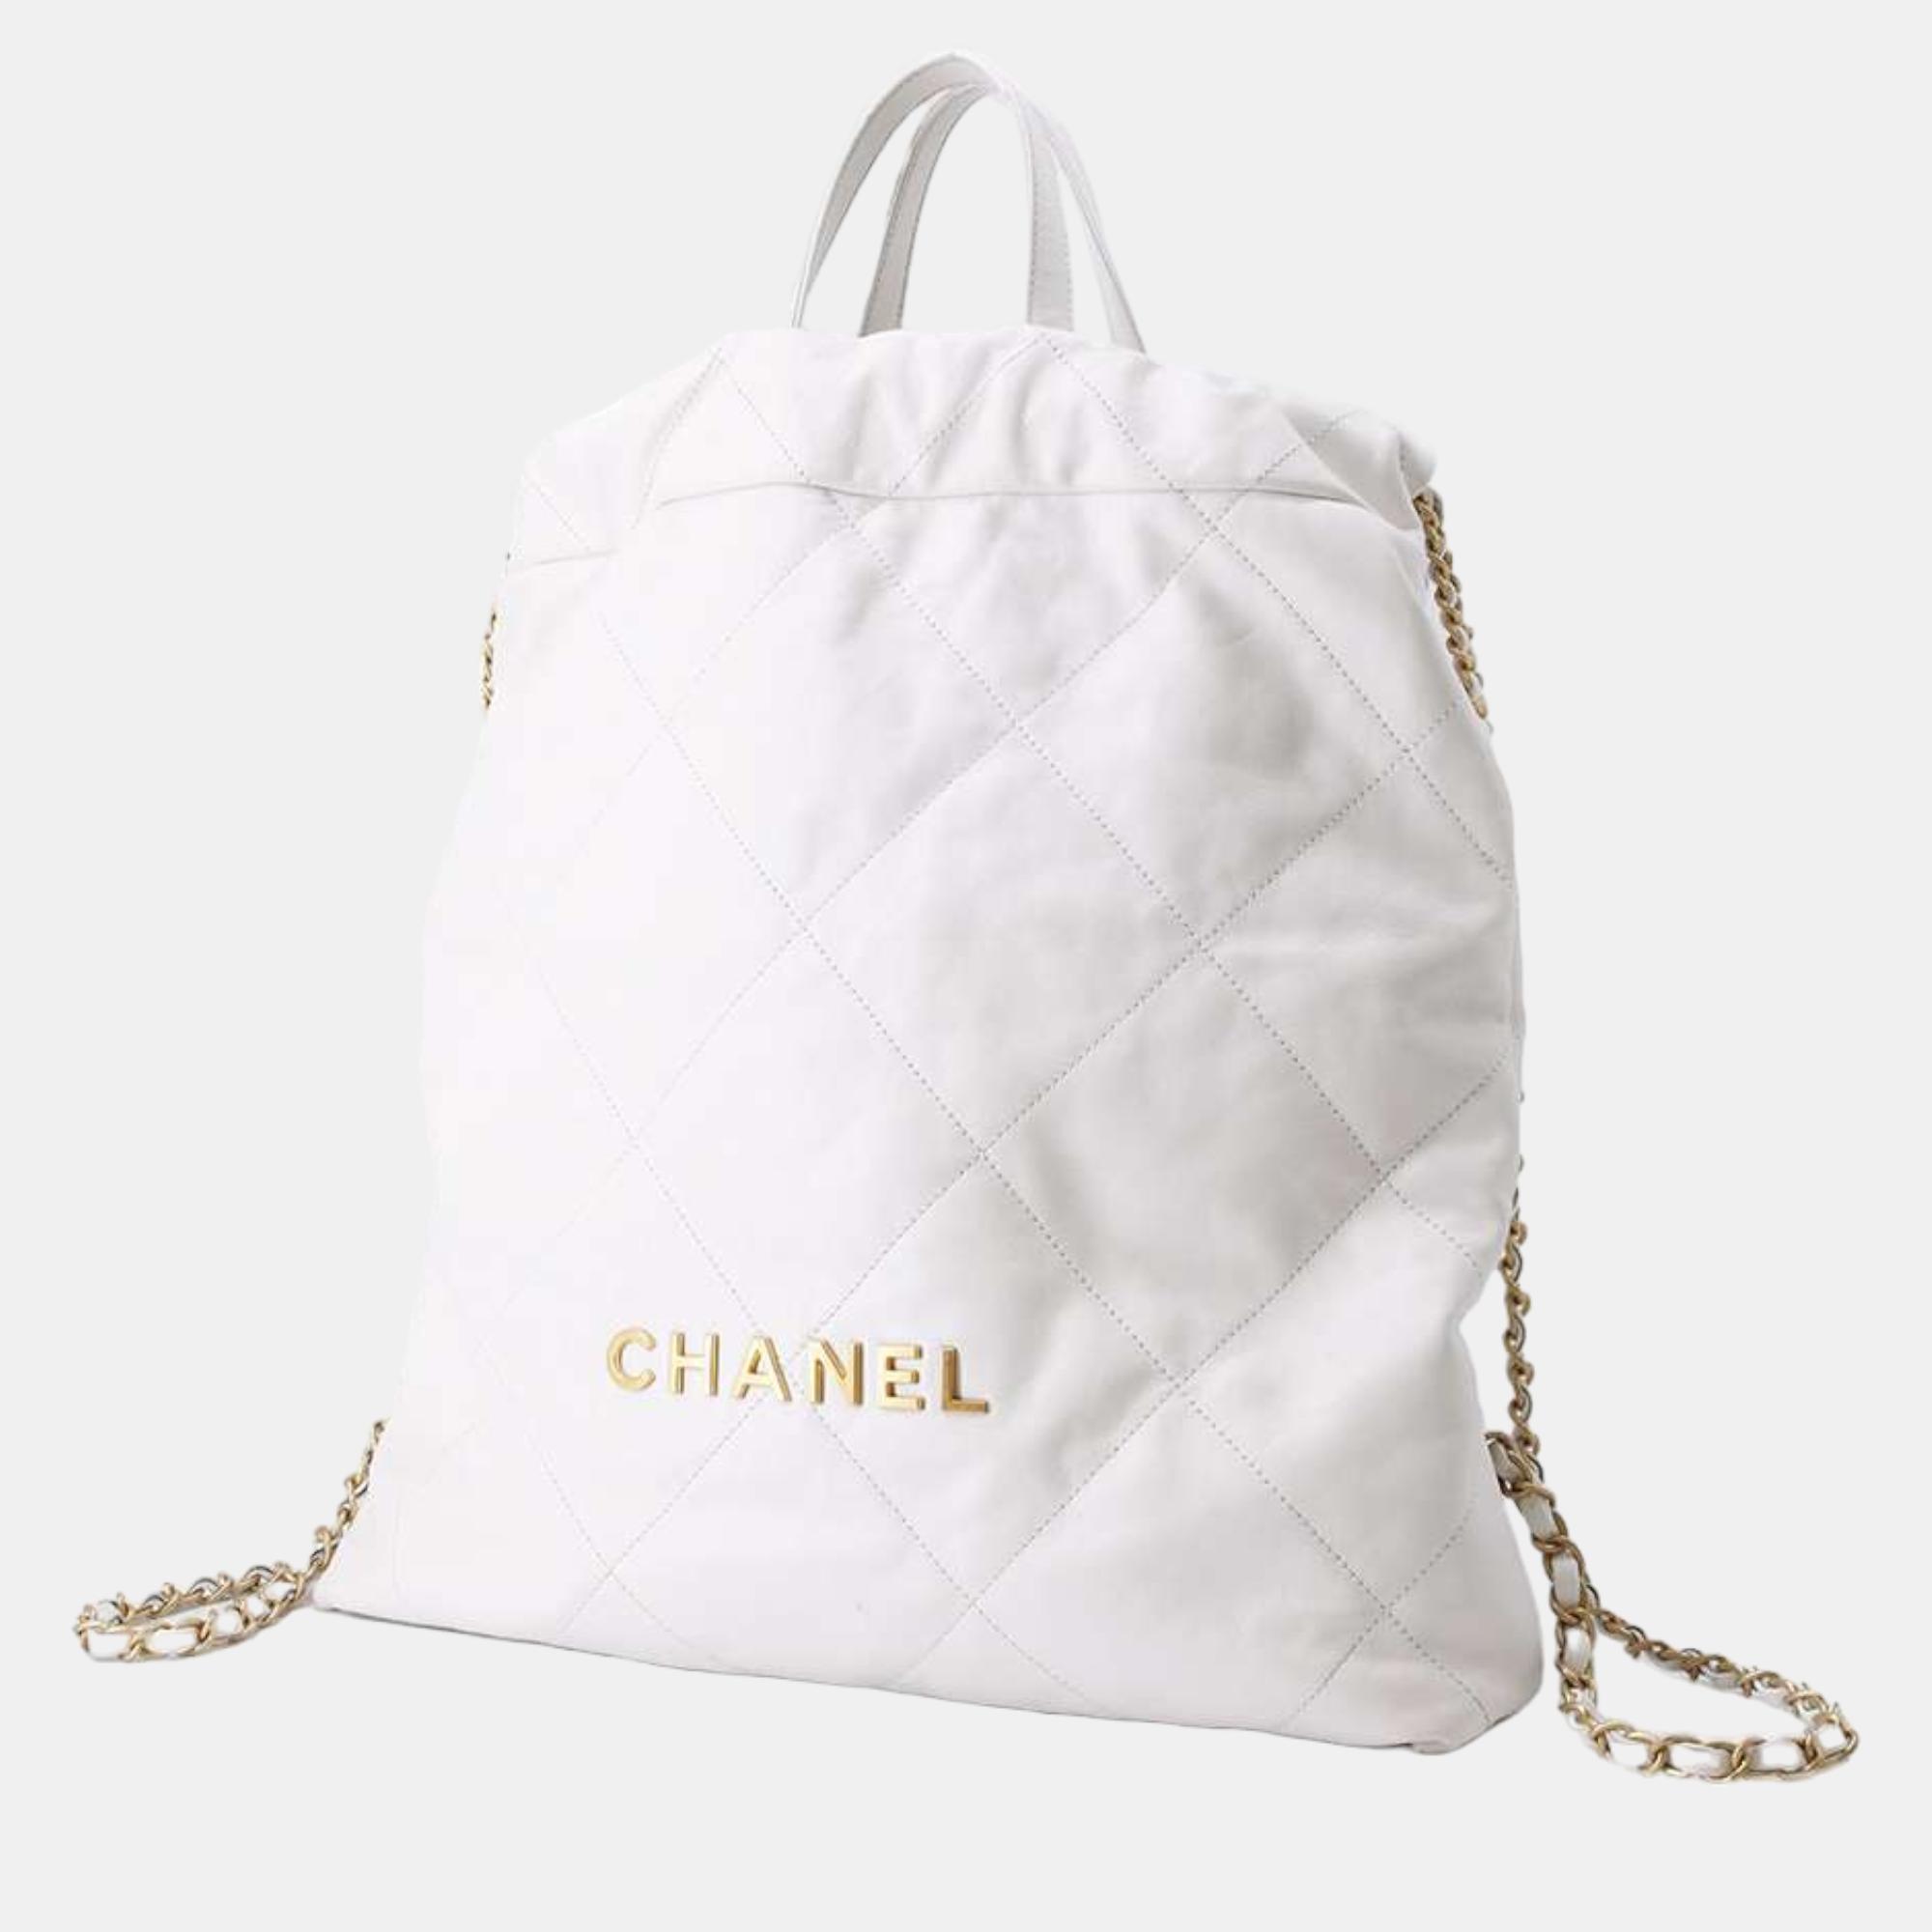 Pre-owned Chanel White Leather Large 22 Bag